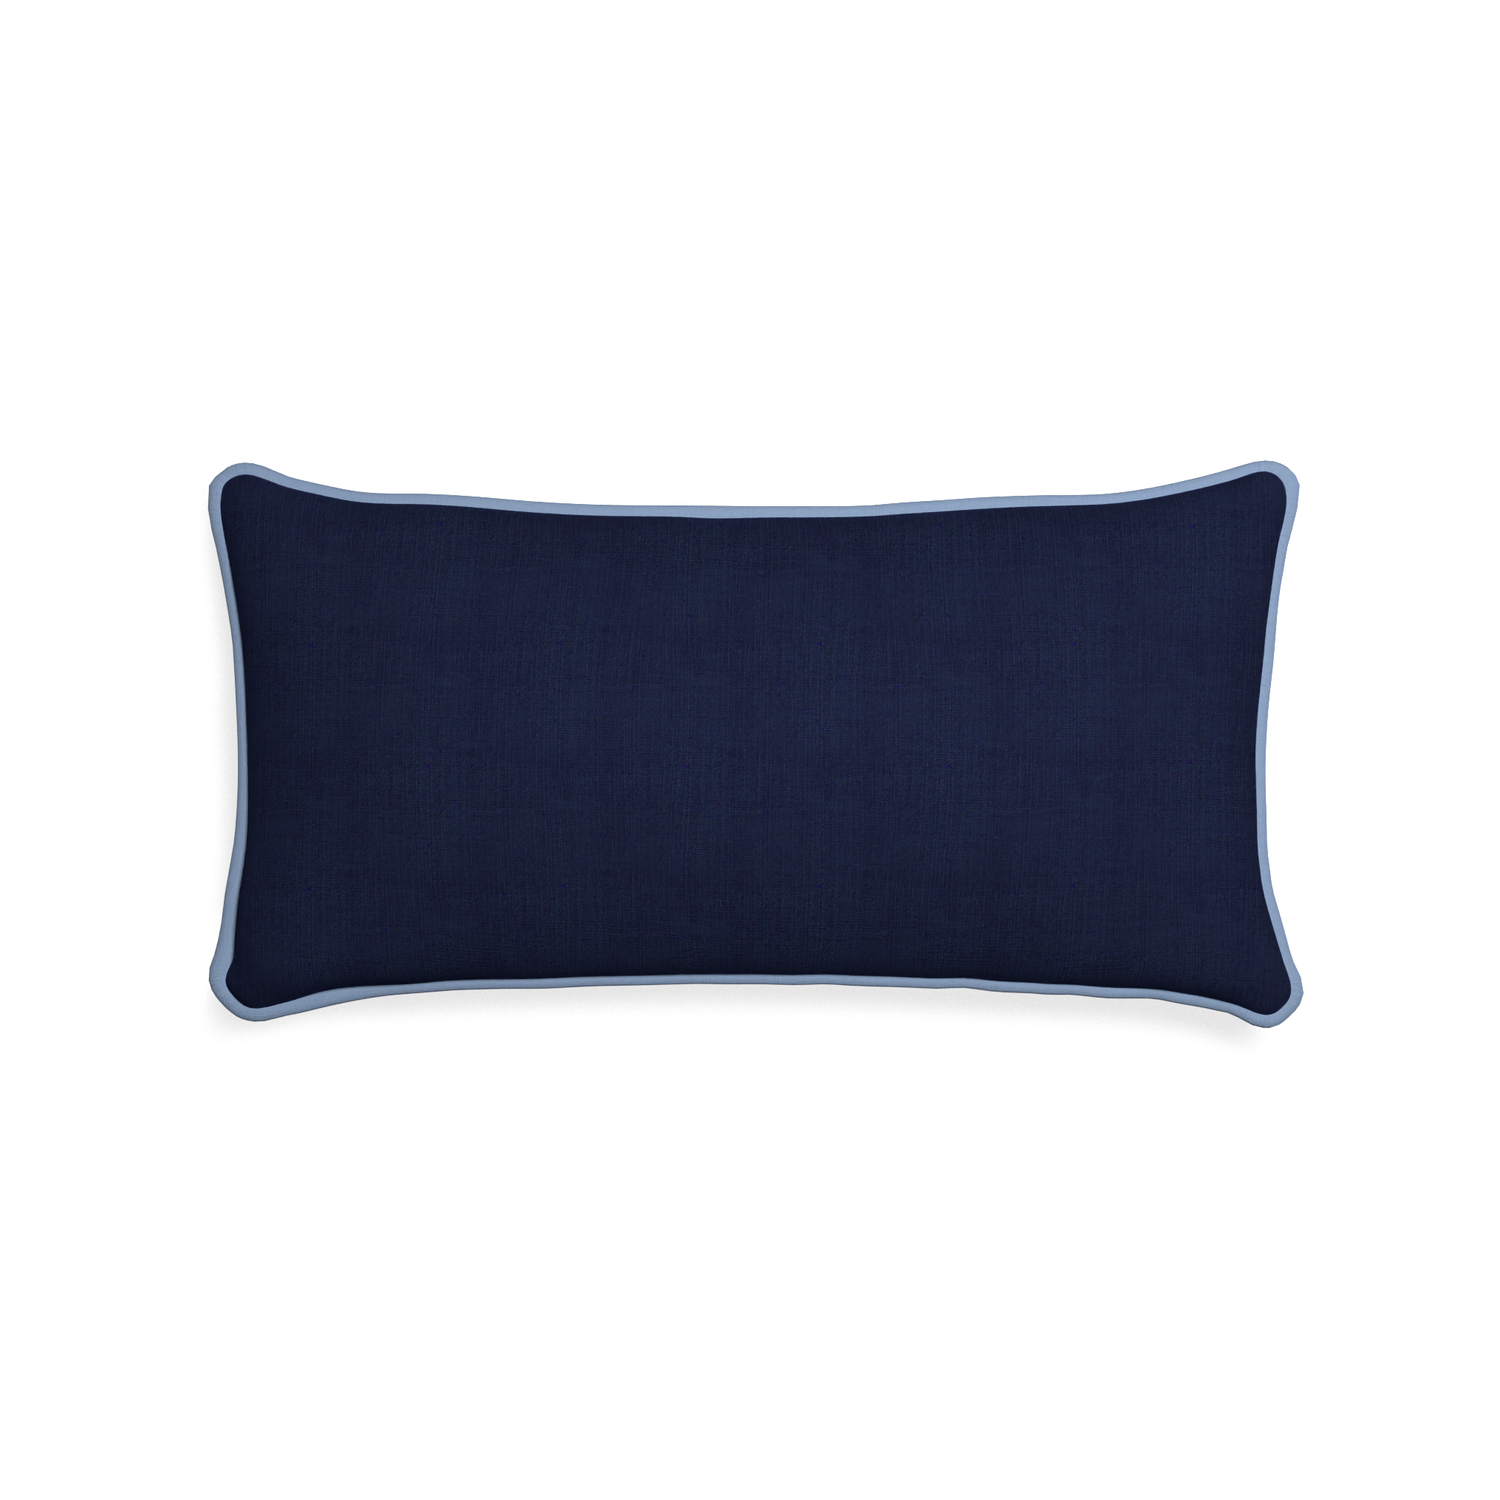 Midi-lumbar midnight custom navy bluepillow with sky piping on white background